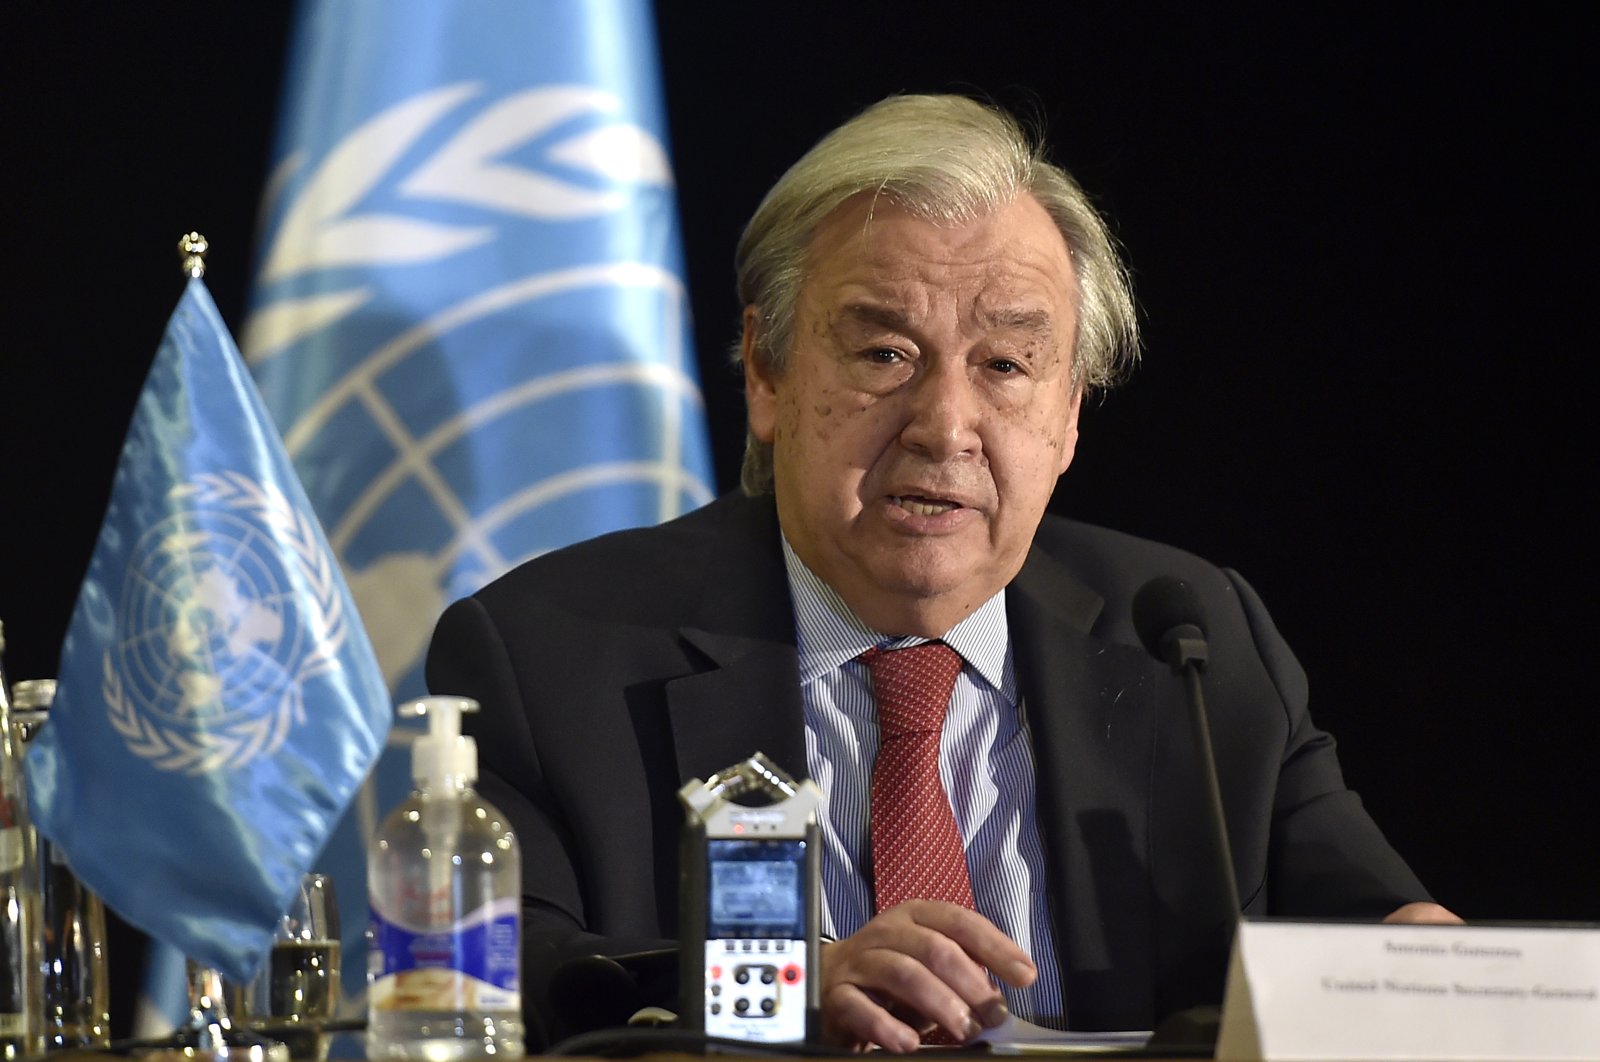 Antonio Guterres, Secretary-General of the United Nations, speaks during a press conference at the end of his visit to Lebanon, in Beirut, Lebanon, Dec. 21, 2021. (EPA Photo)